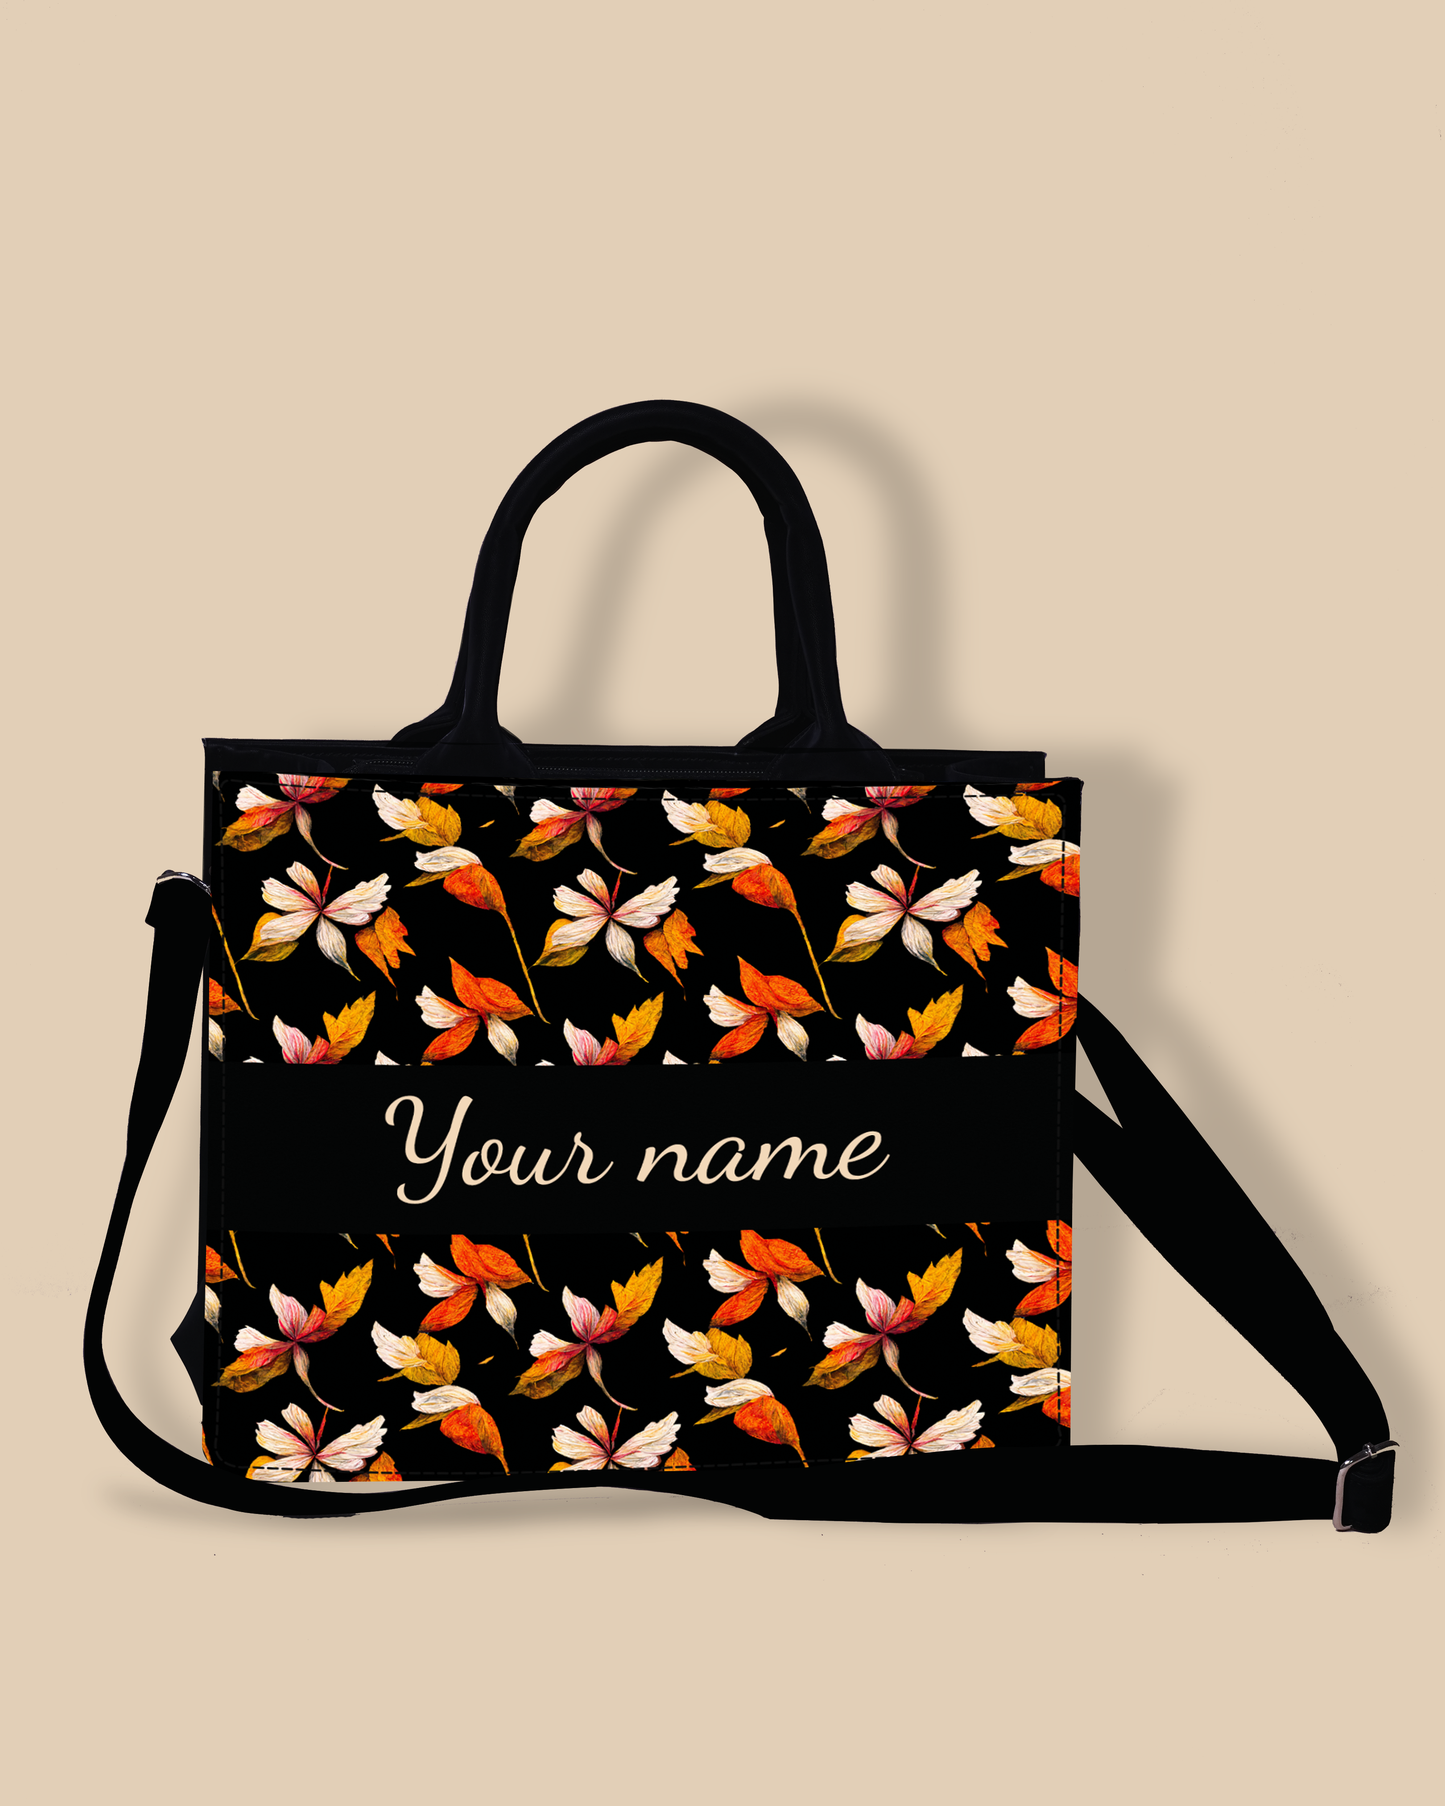 Personalized Small Tote Bag Designed With Watercolour Autumn Leaves Pattern